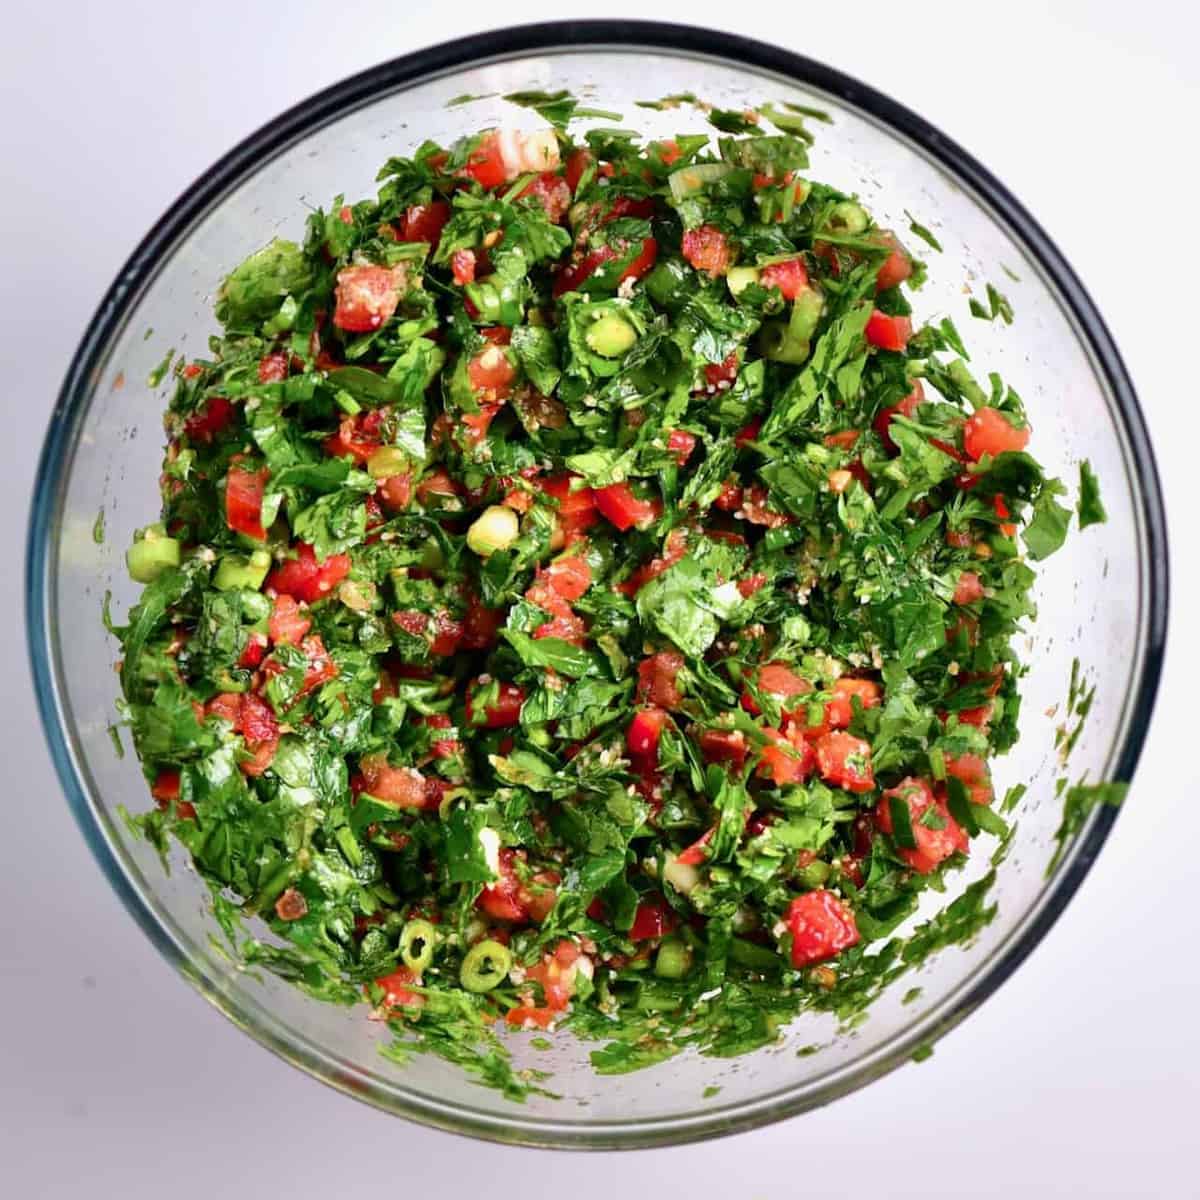 In a bowl, mixed fresh Tabbouleh/tabouli salad